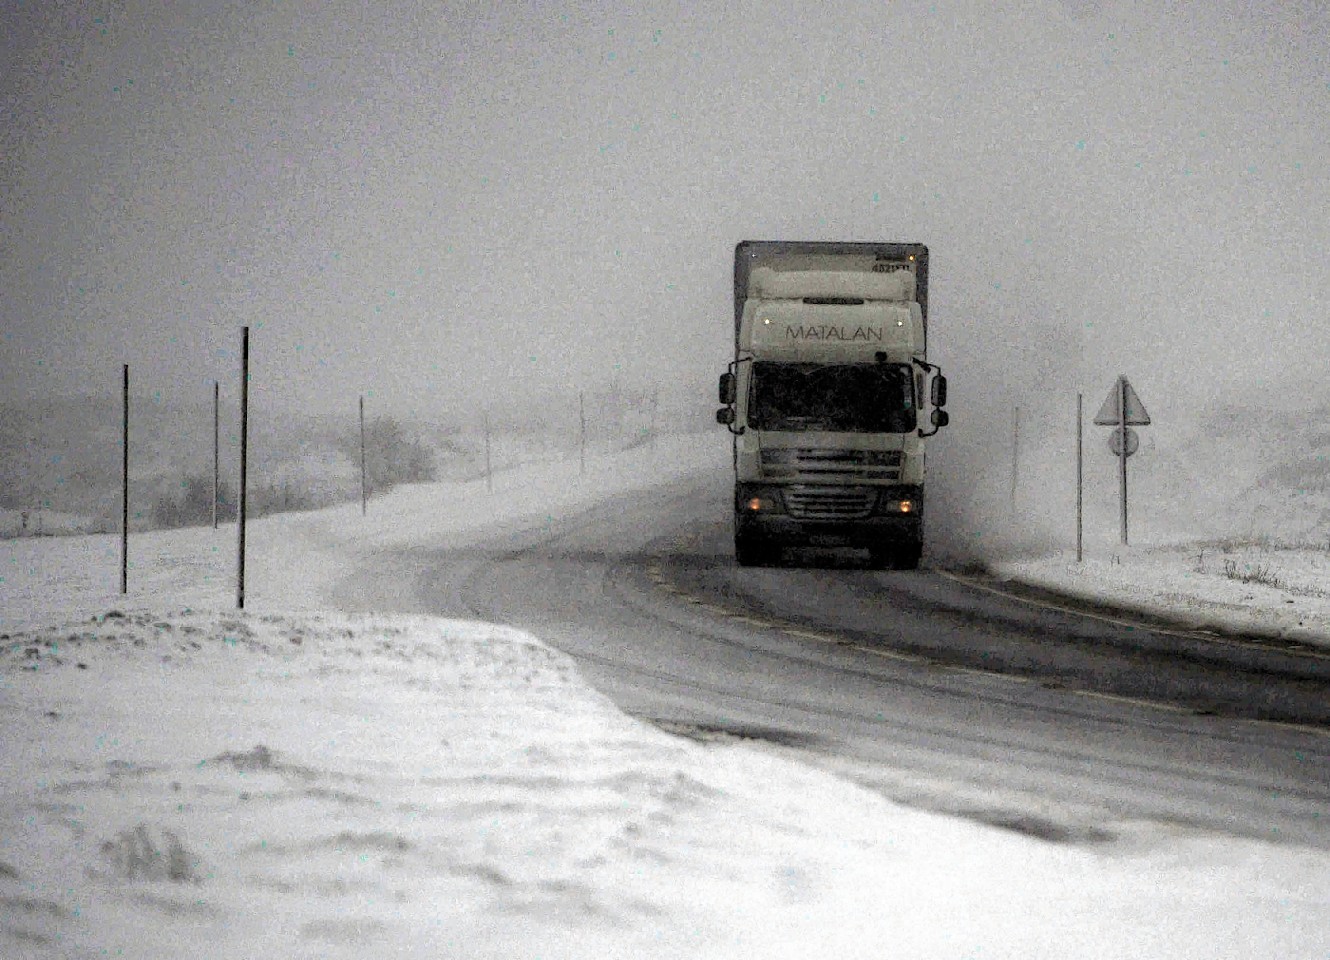 Temperatures dropped as low as -3C on the Drumochter Pass